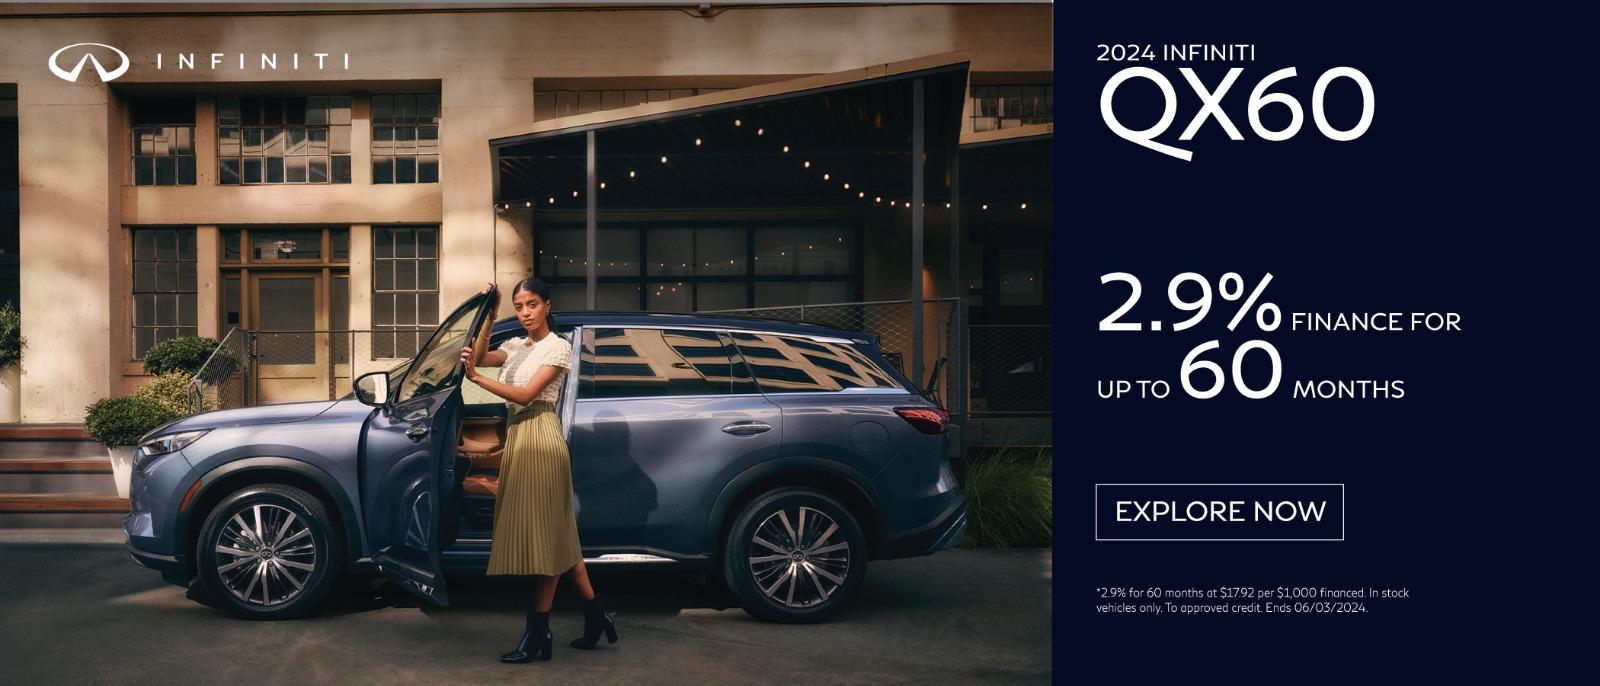 2023 INFINITI QX60 2.9% Finance for up to 60 months